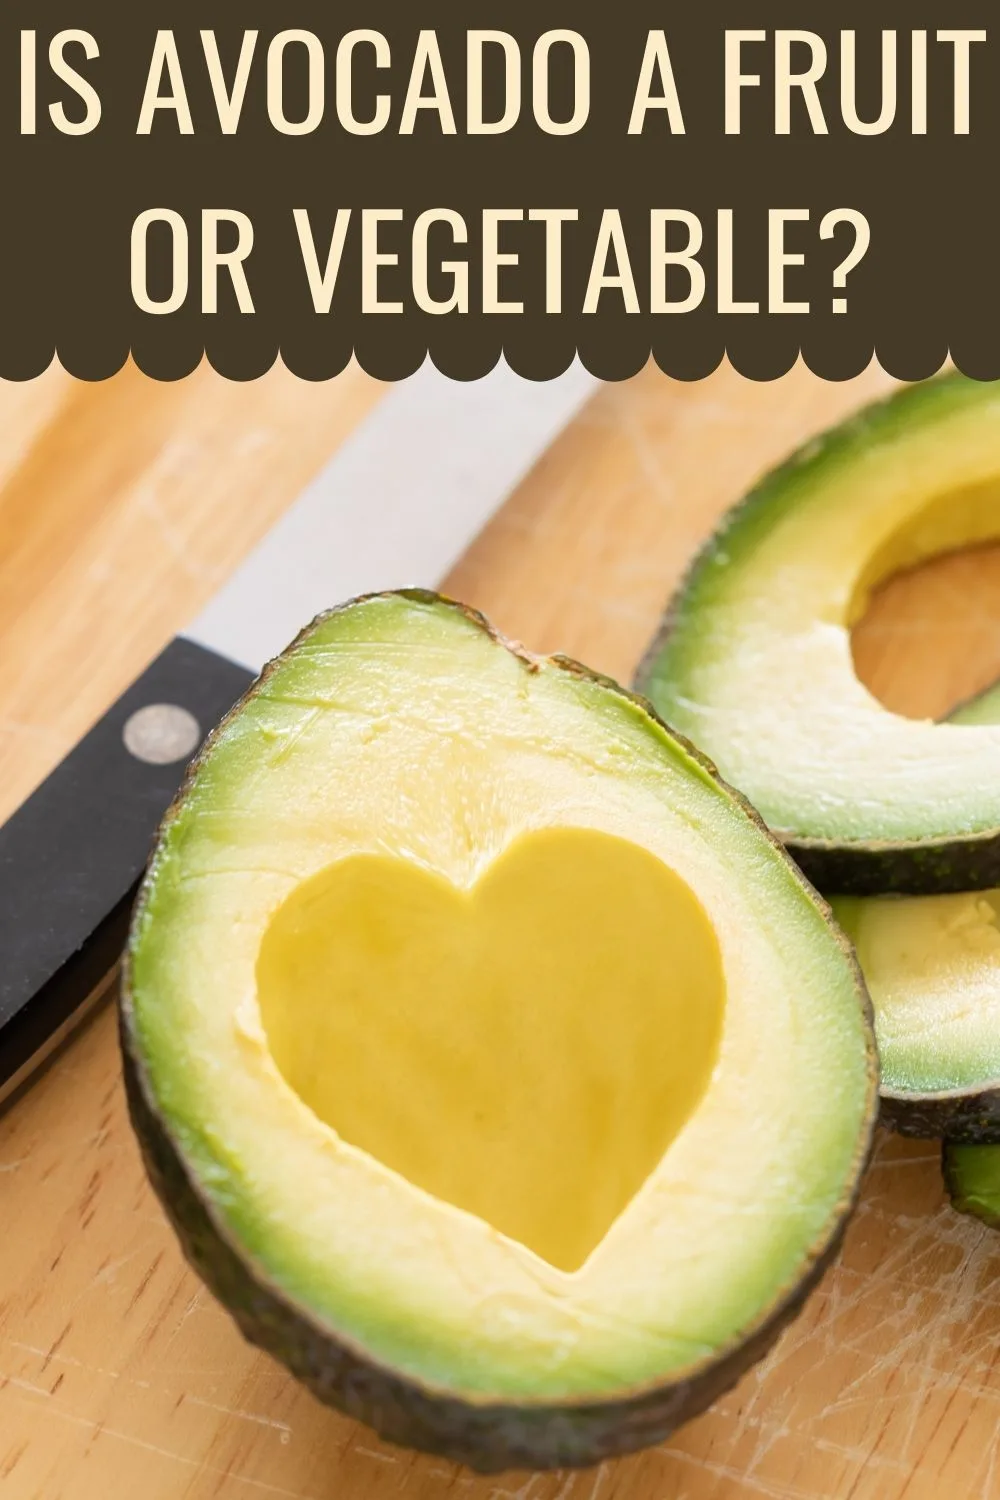 is avocado a fruit or vegetable?